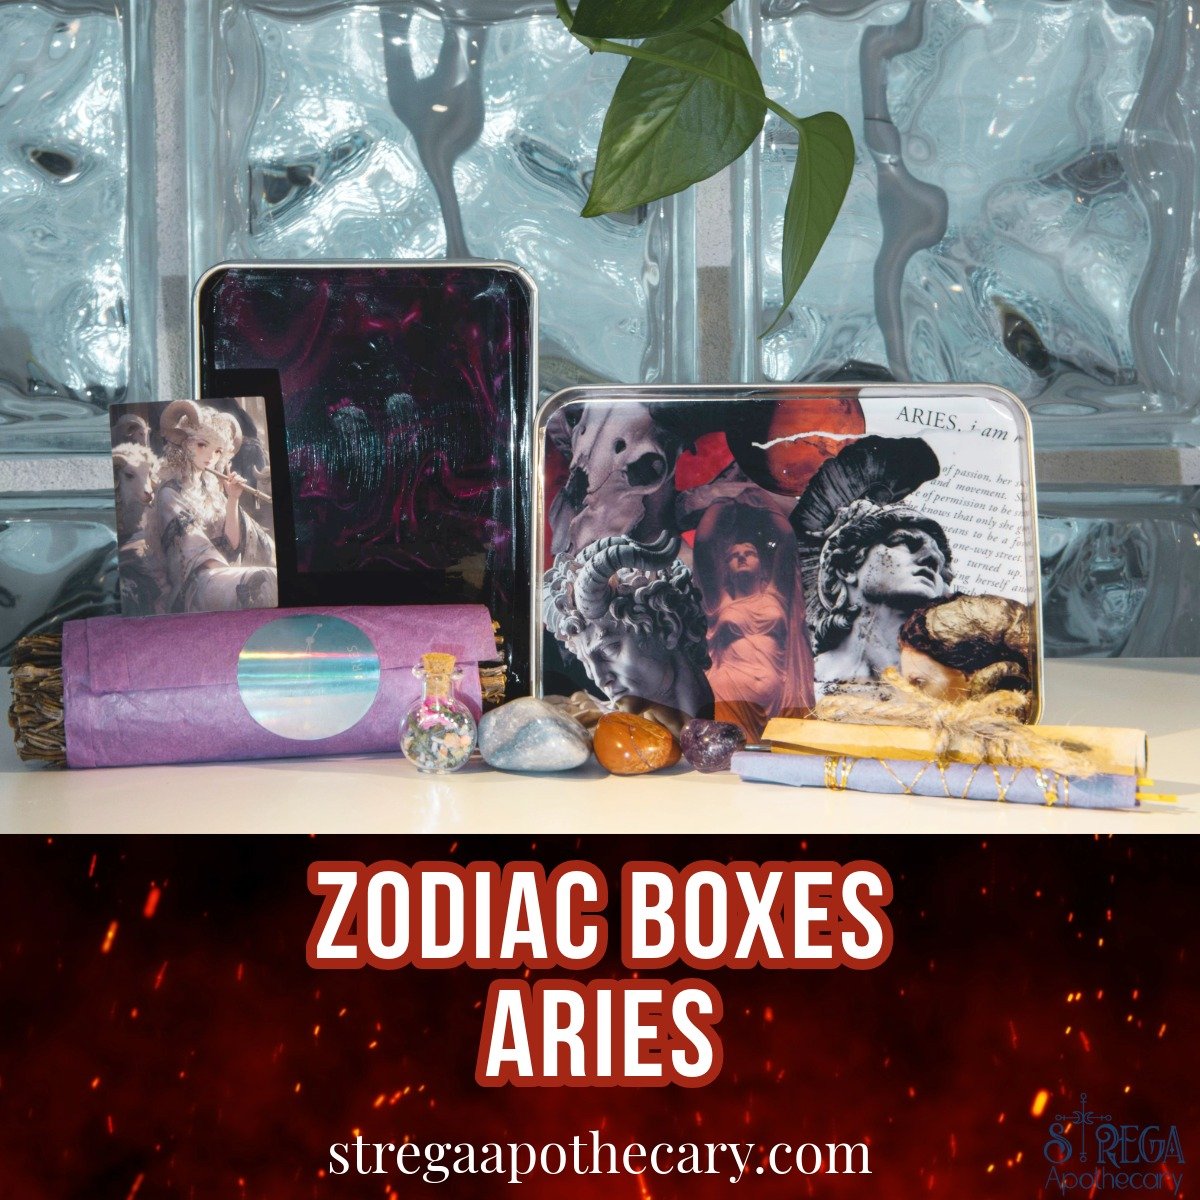 With our Aries Zodiac Box, you'll be empowered to embrace your leadership qualities, pursue your passions fearlessly, and conquer any challenge that comes your way. Whether you're a born trailblazer or seeking to reignite your spark, this box is your